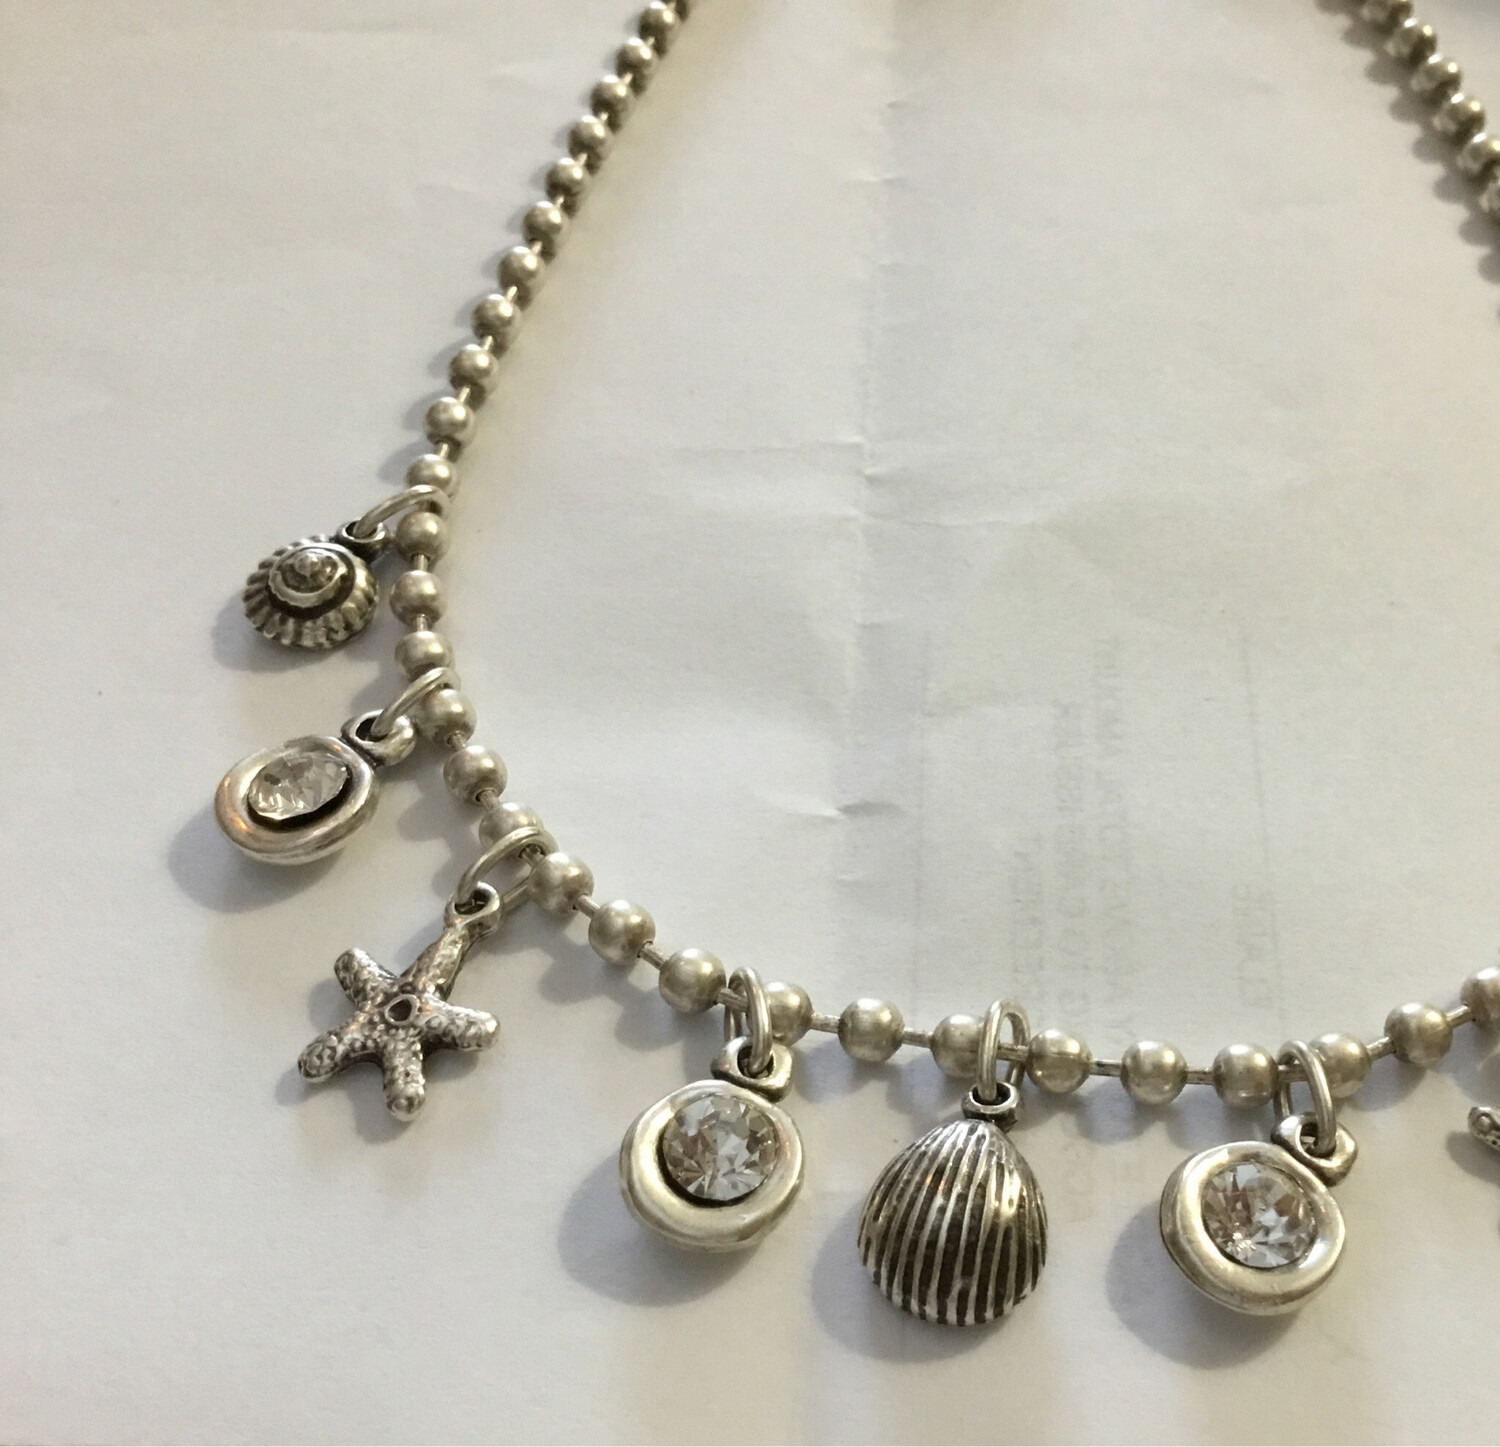 Handmade Pewter Short Necklace With Sea Creatures